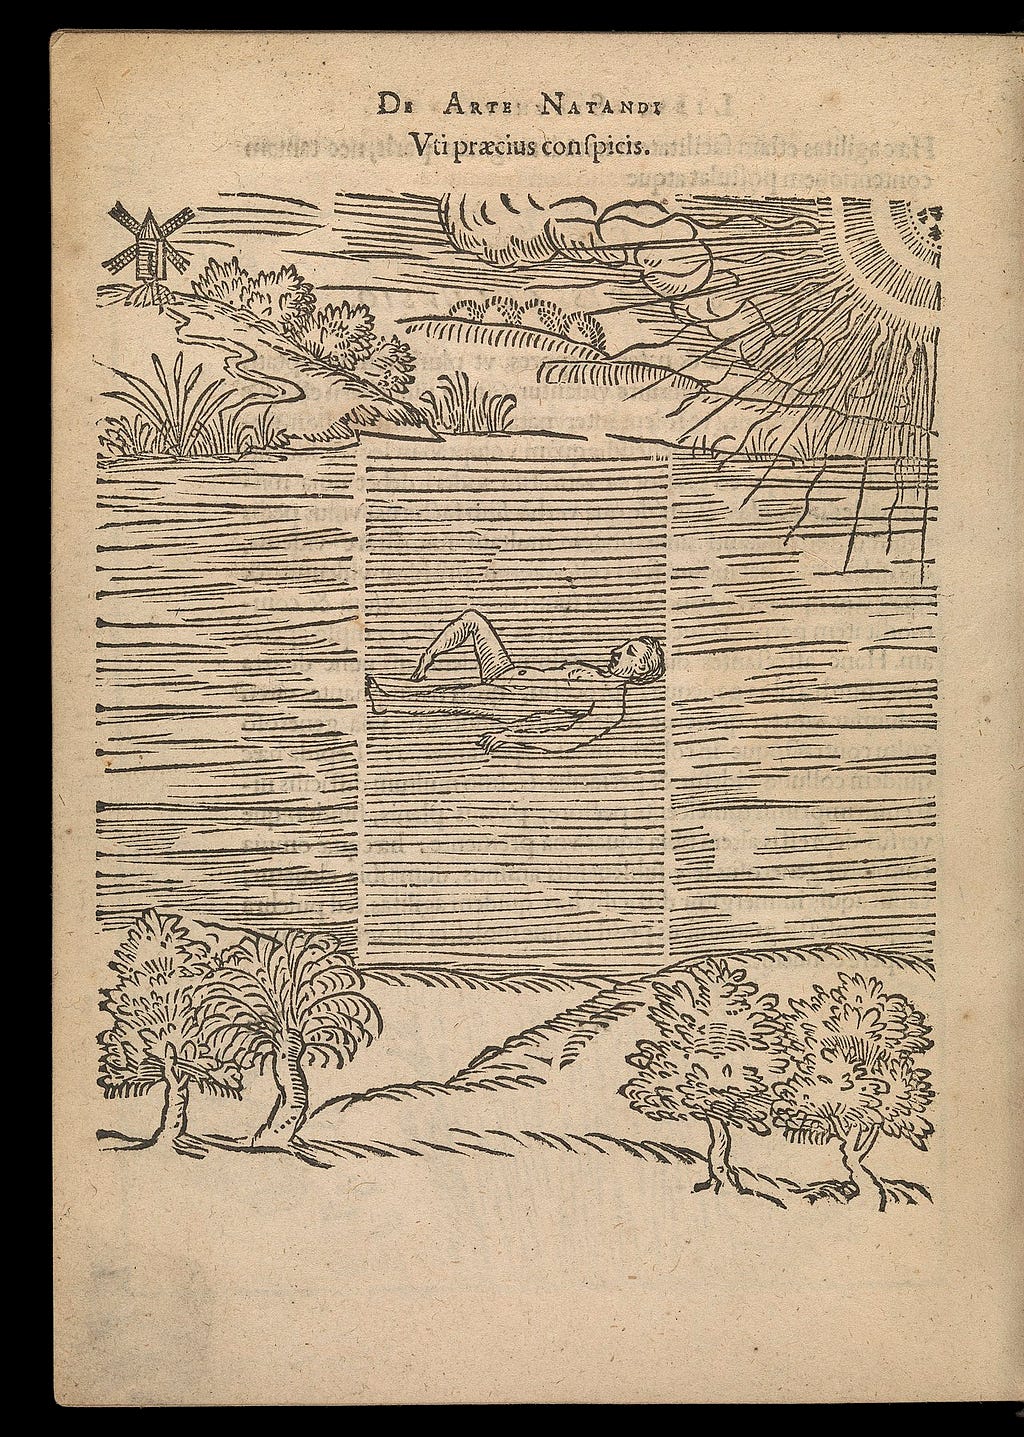 Woodcut of a nude man floating in a river. Shrubs surround the river and the sun’s rays are visible.